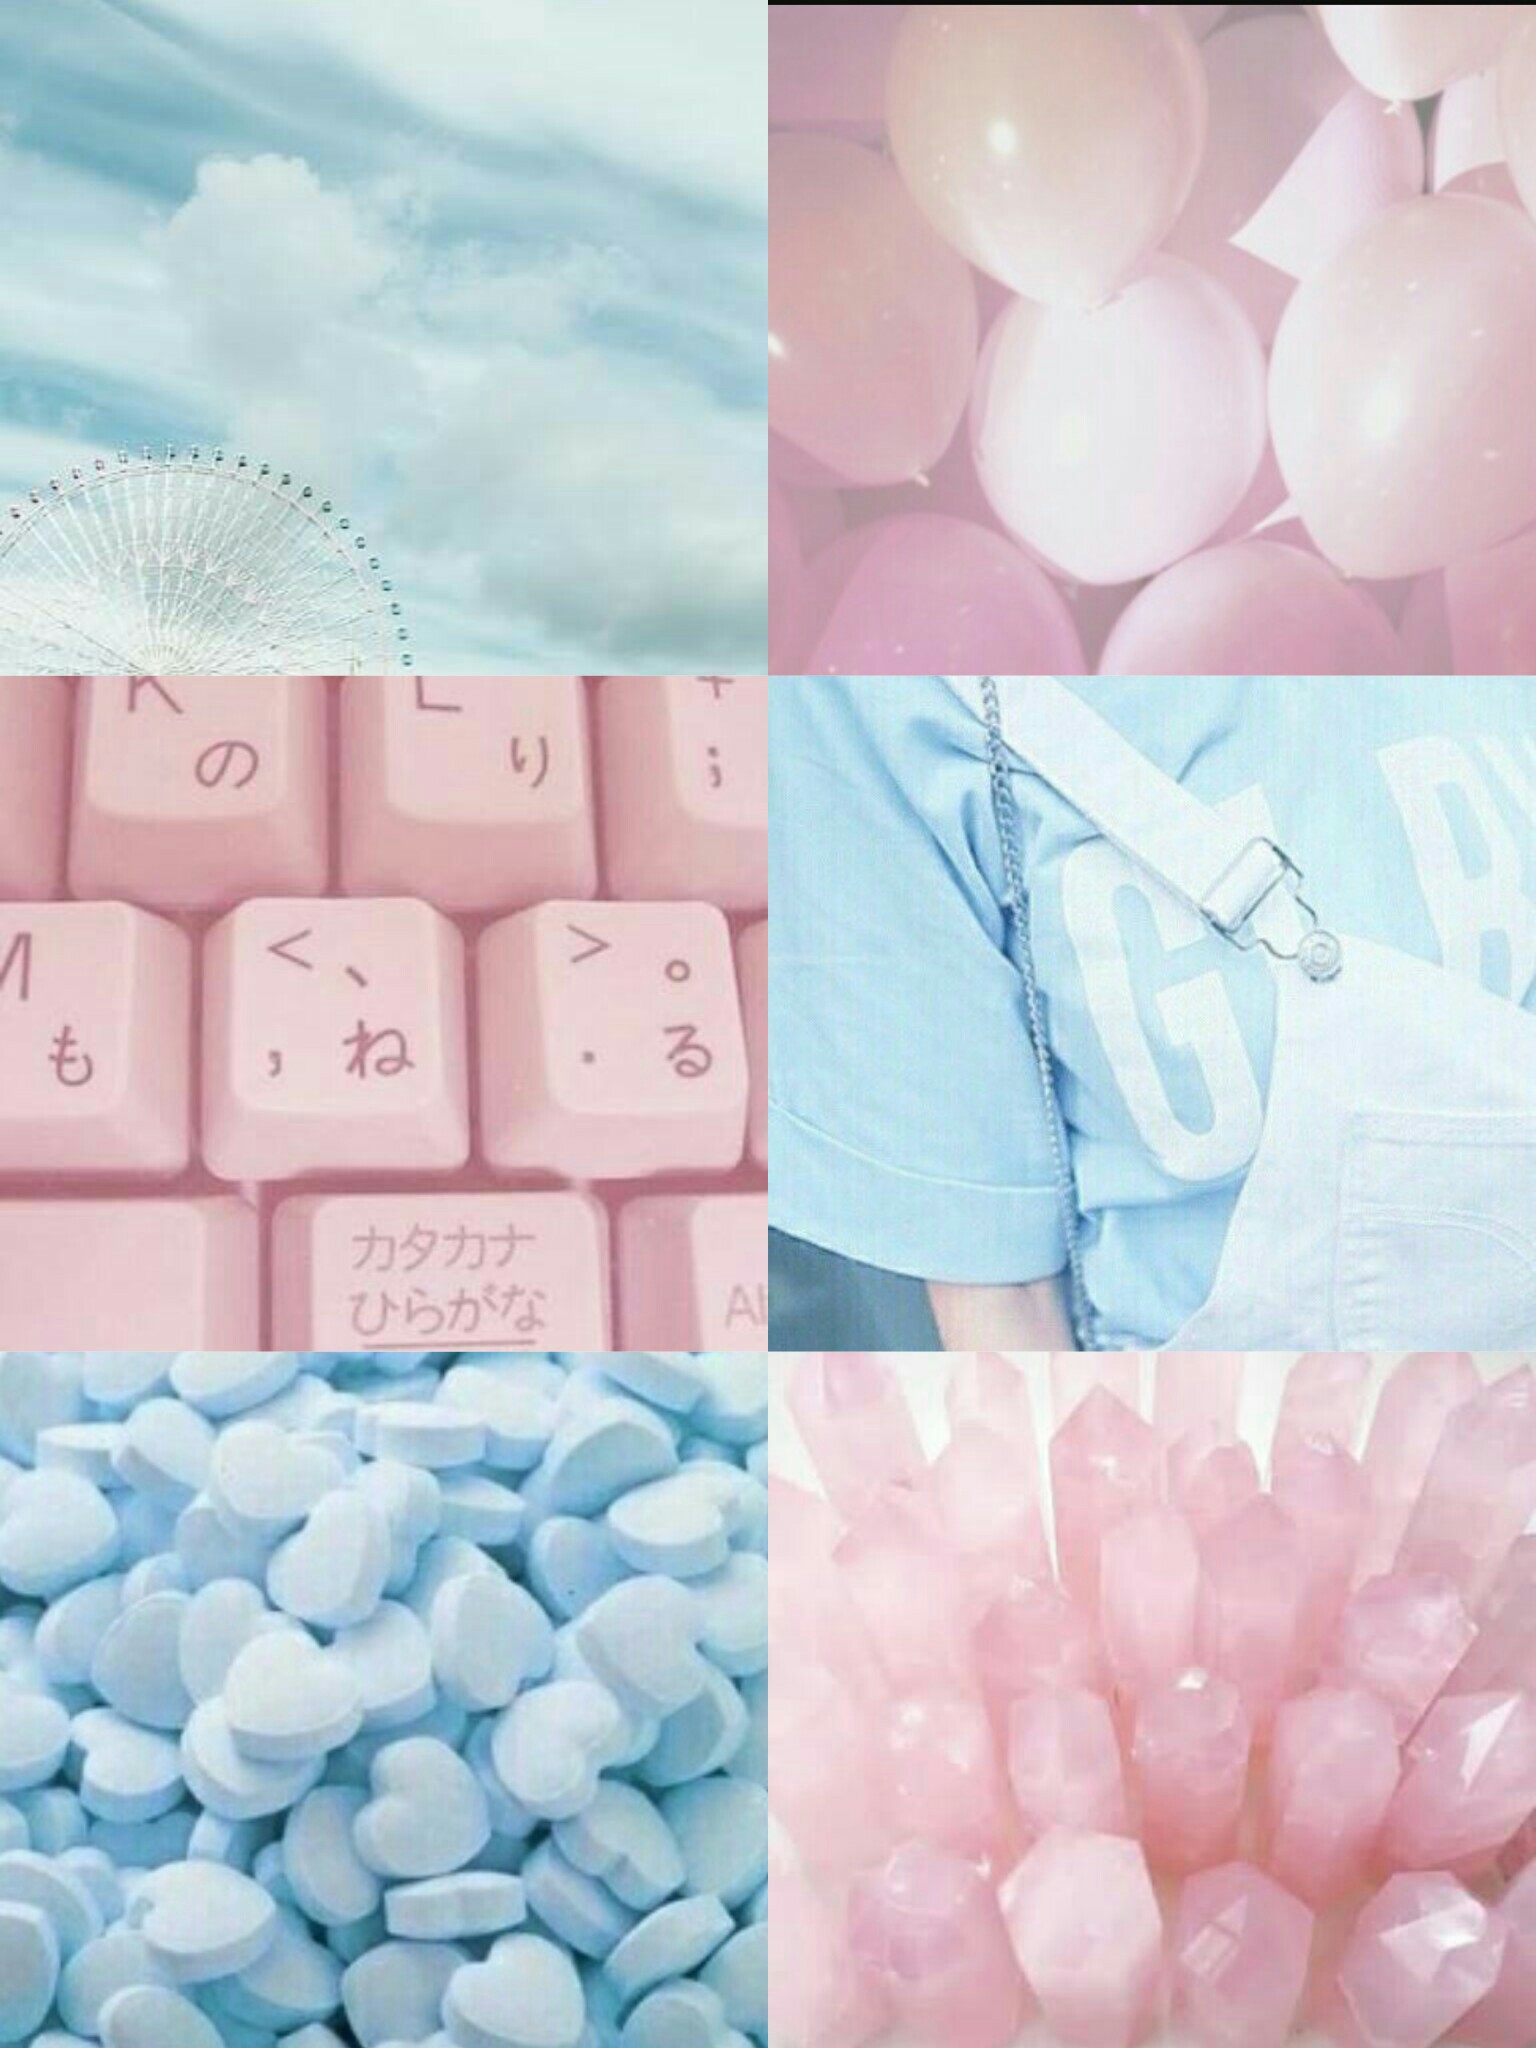 Aesthetic Pictures Blue And Pink - Largest Wallpaper Portal